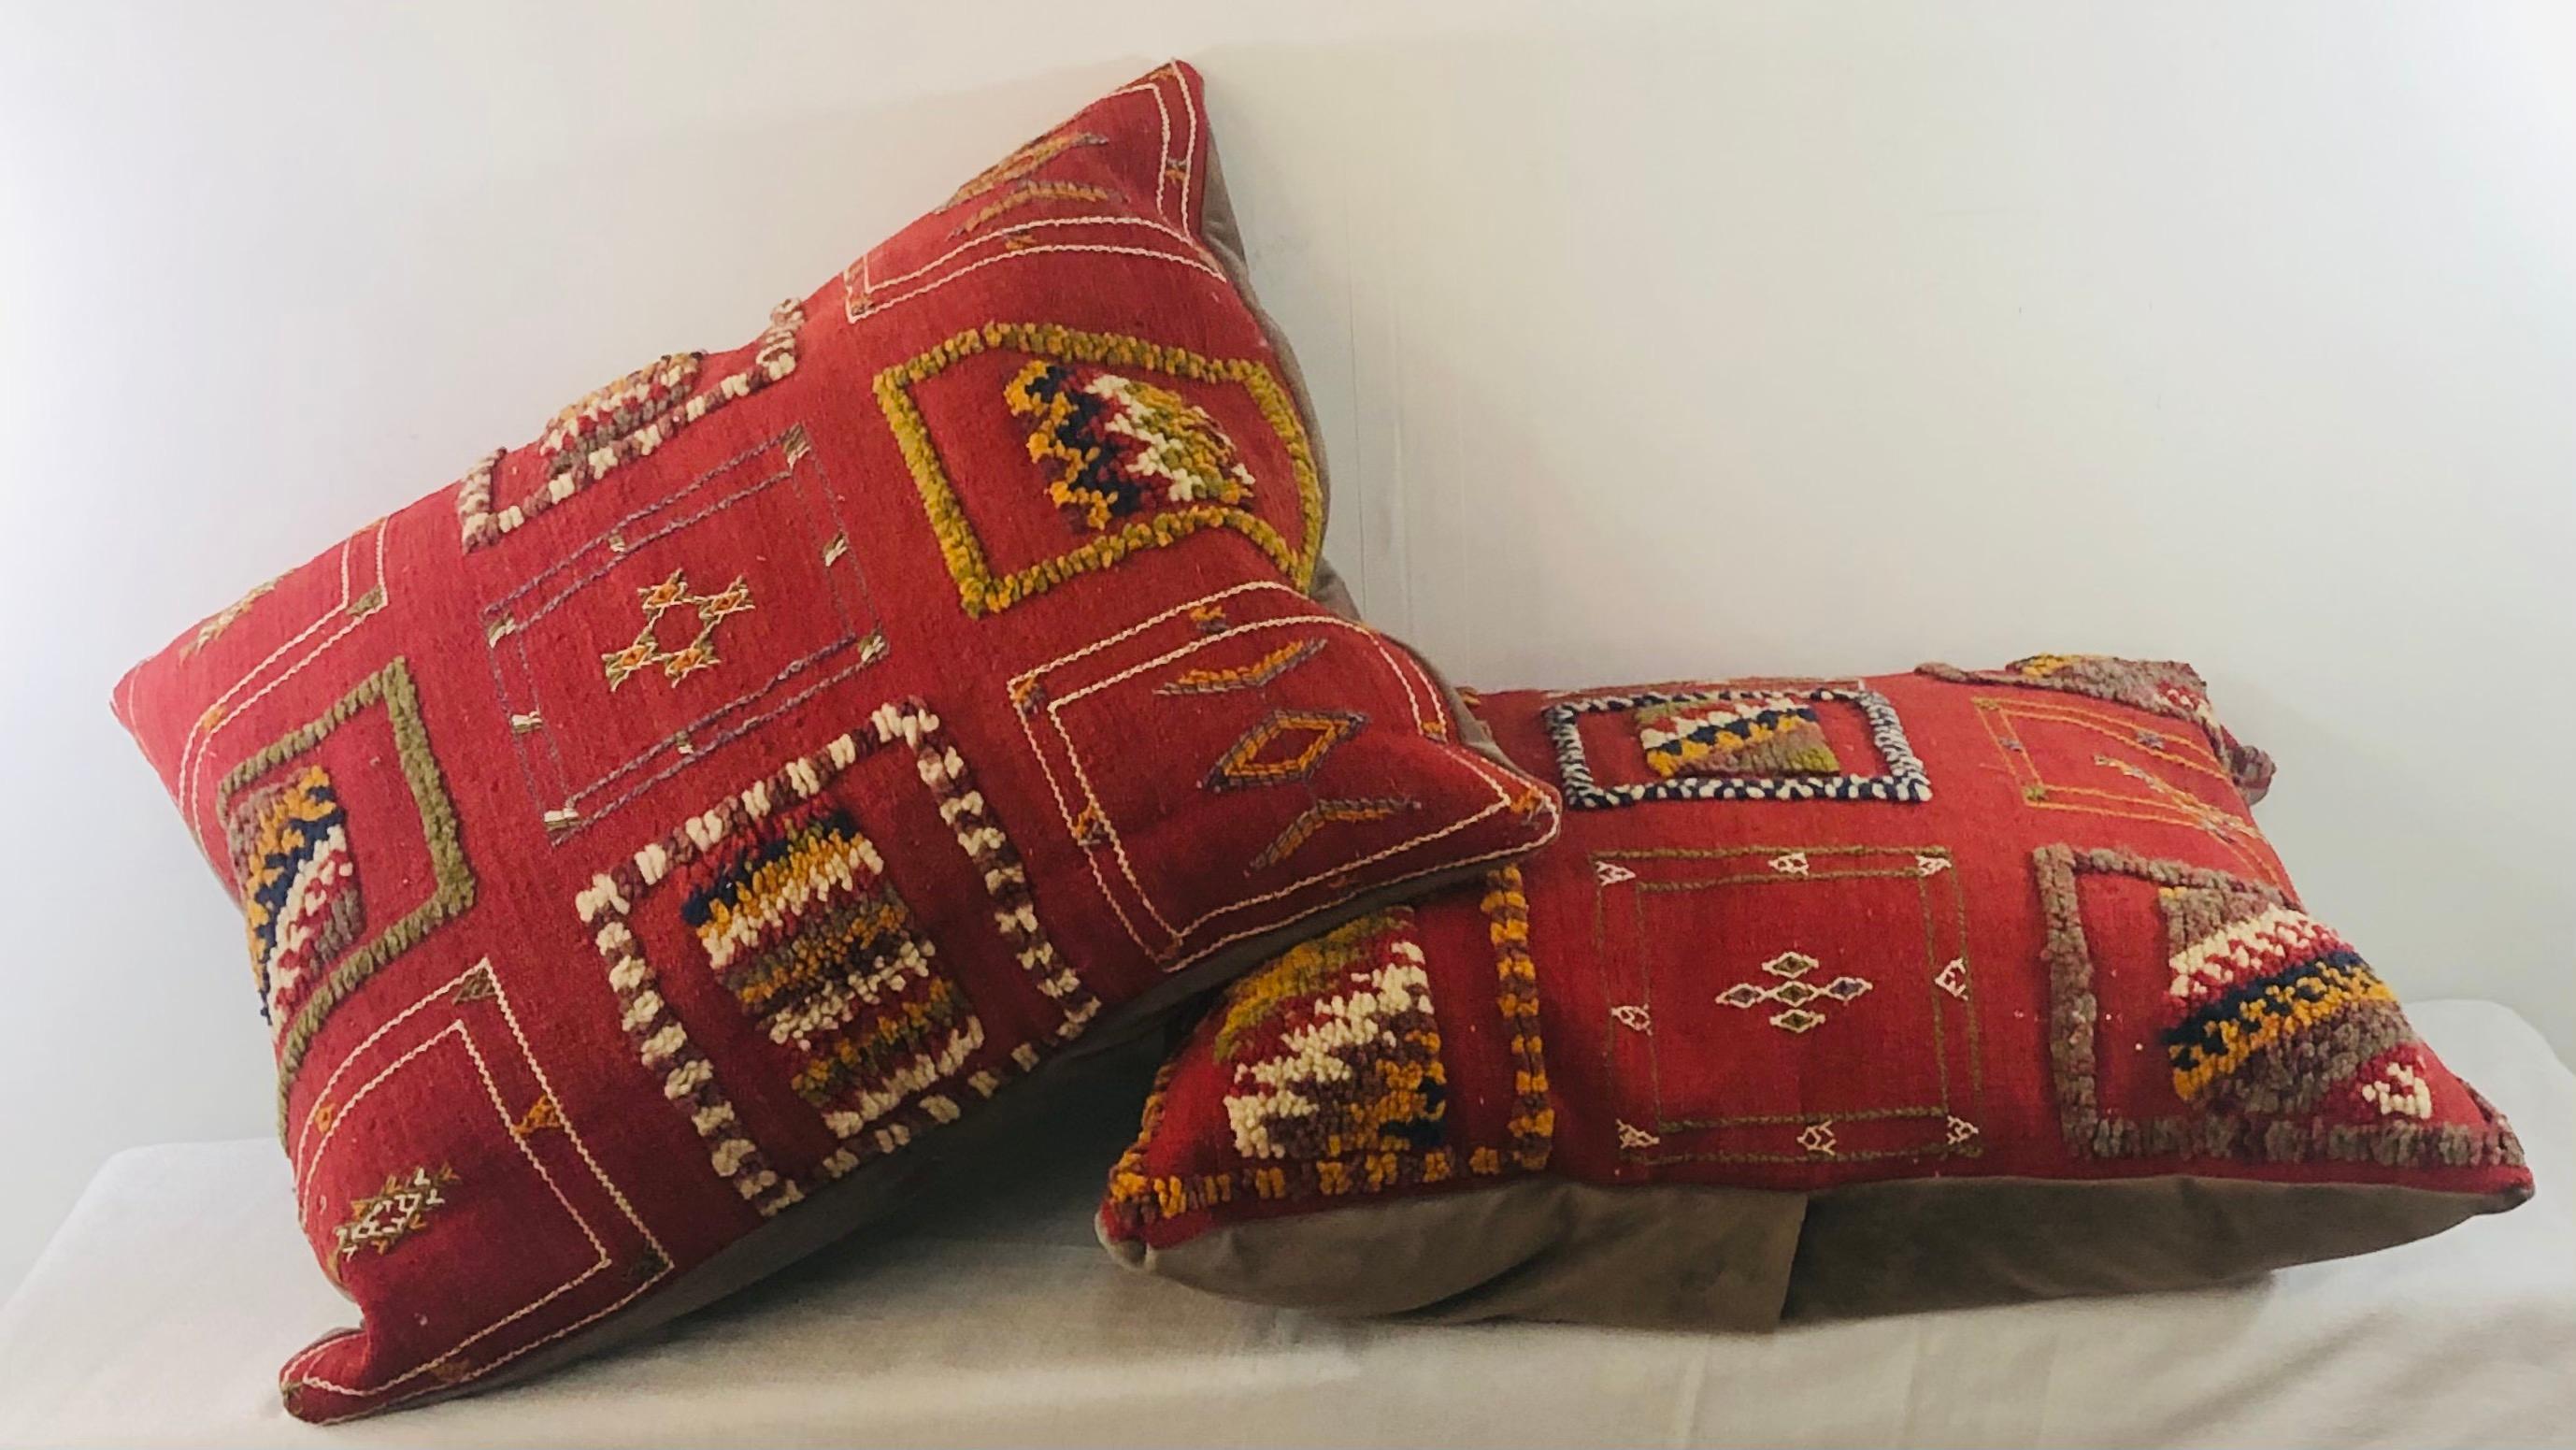 Featuring vivid and earthy burgundy, blue, off white and green colors, this stunning one-of-a-kind pair of Kilim pillows are custom made from a vintage Moroccan wool rug handwoven in the Atlas Mountains in Morocco by Berber women artisans. Panels